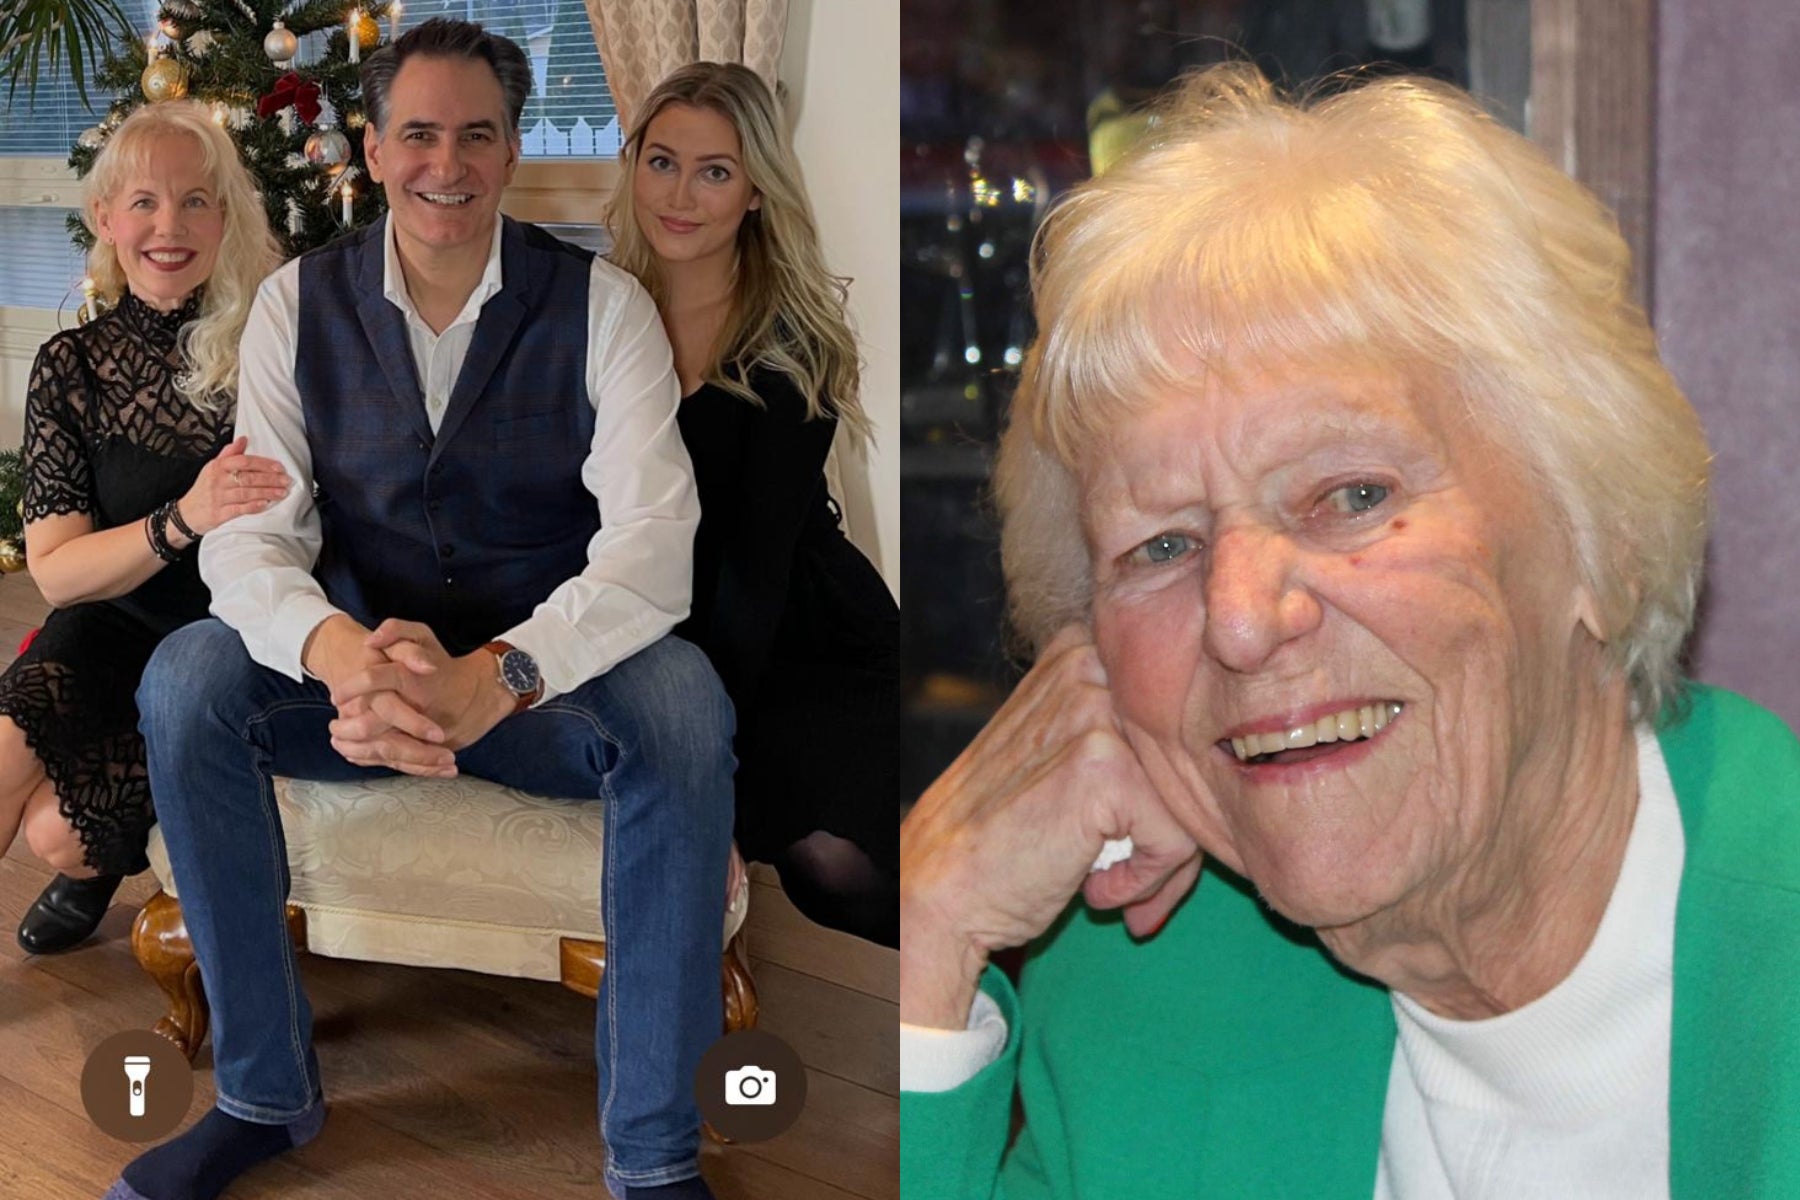 Peter Stefanovic, 58, discovered his secret family after doing a home DNA test (Collect/PA Real Life)